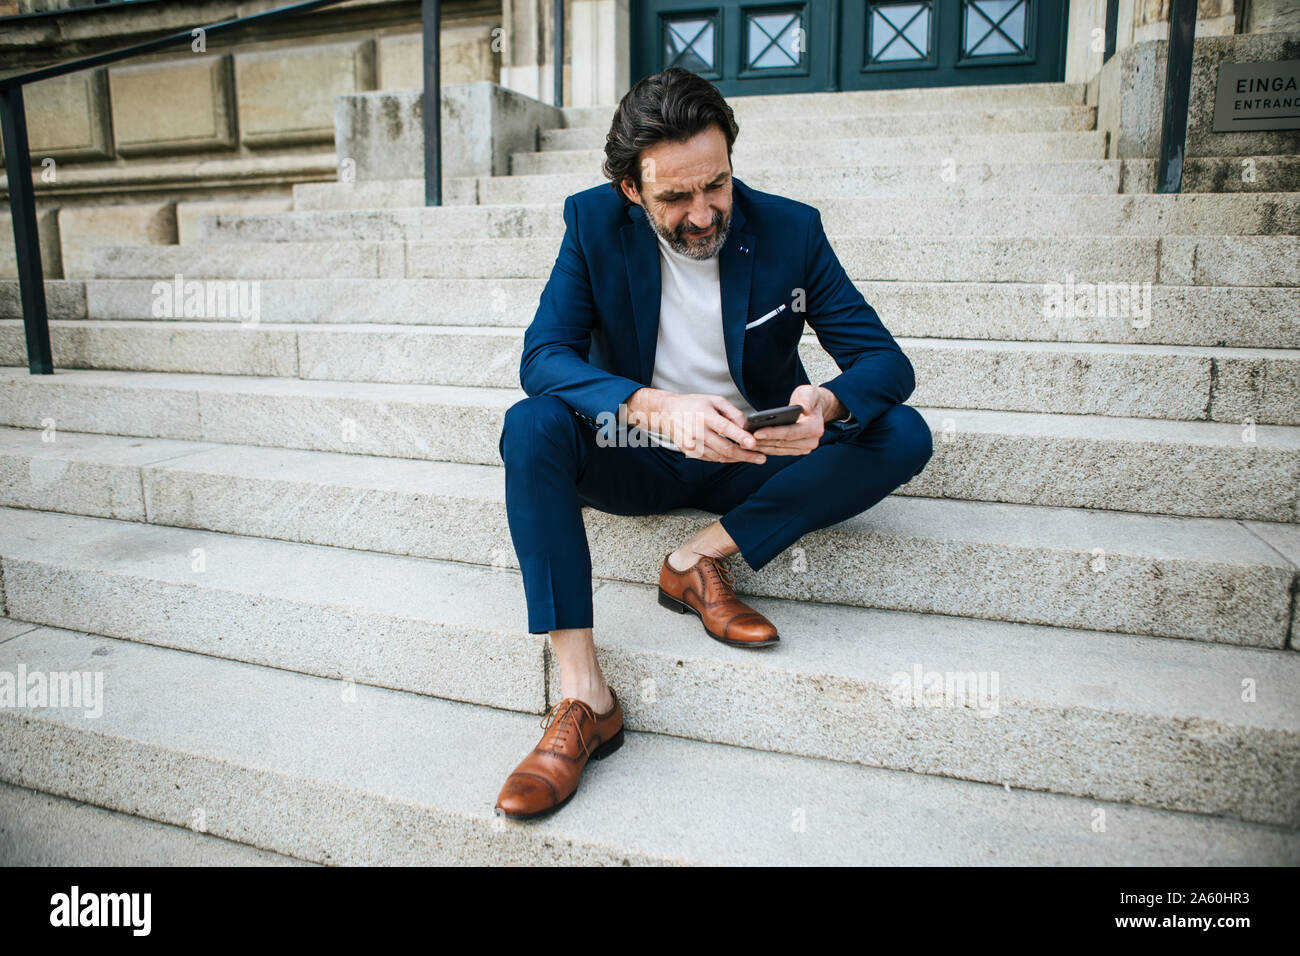 Bearded mature businessman wearing blue suit sitting on stairs looking at cell phone Stock Photo